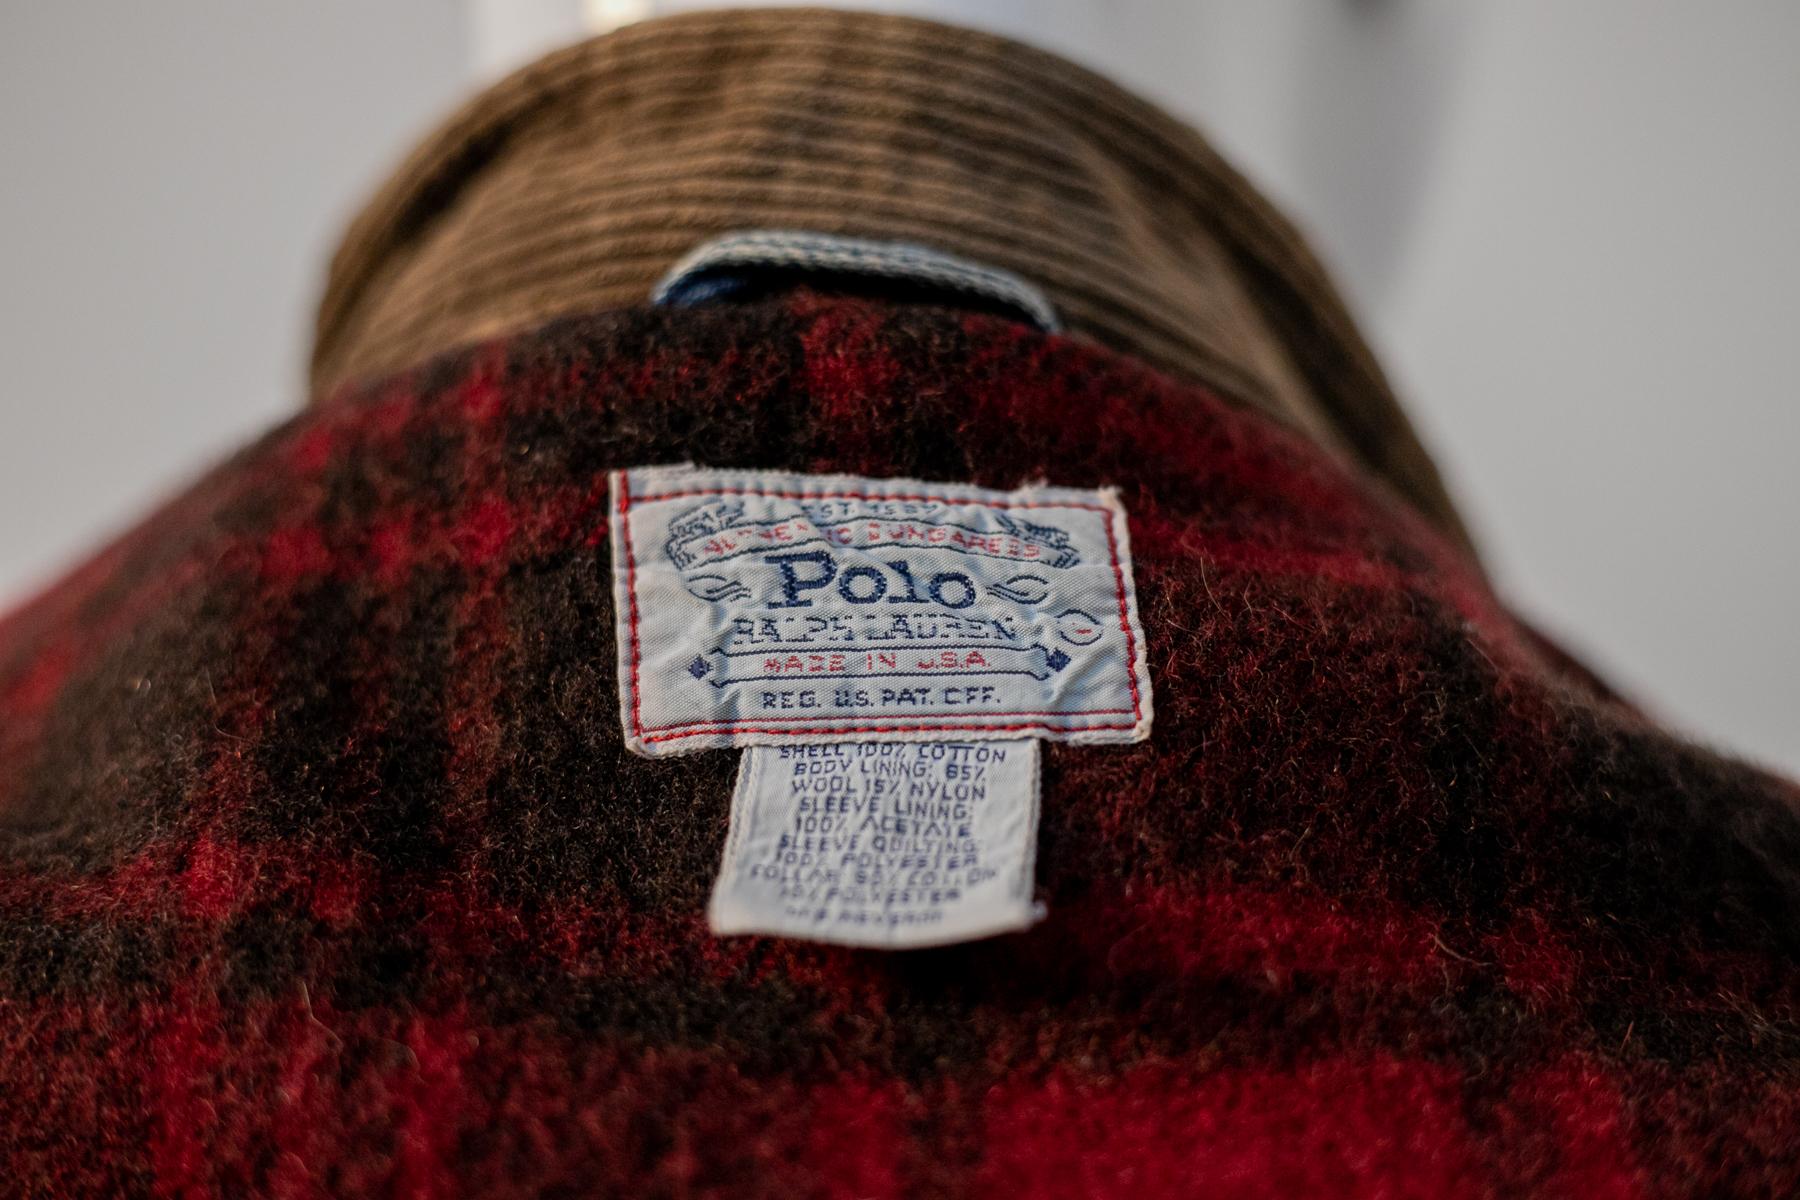 Lovely Polo denim jacket designed by Ralph Lauren in the 1980s. ORIGINAL LABELS.
The jacket is a medium oversize, which means everyone can wear it.
The jacket has the classic rigid cut given by the denim, the sleeves are long and not tight and close